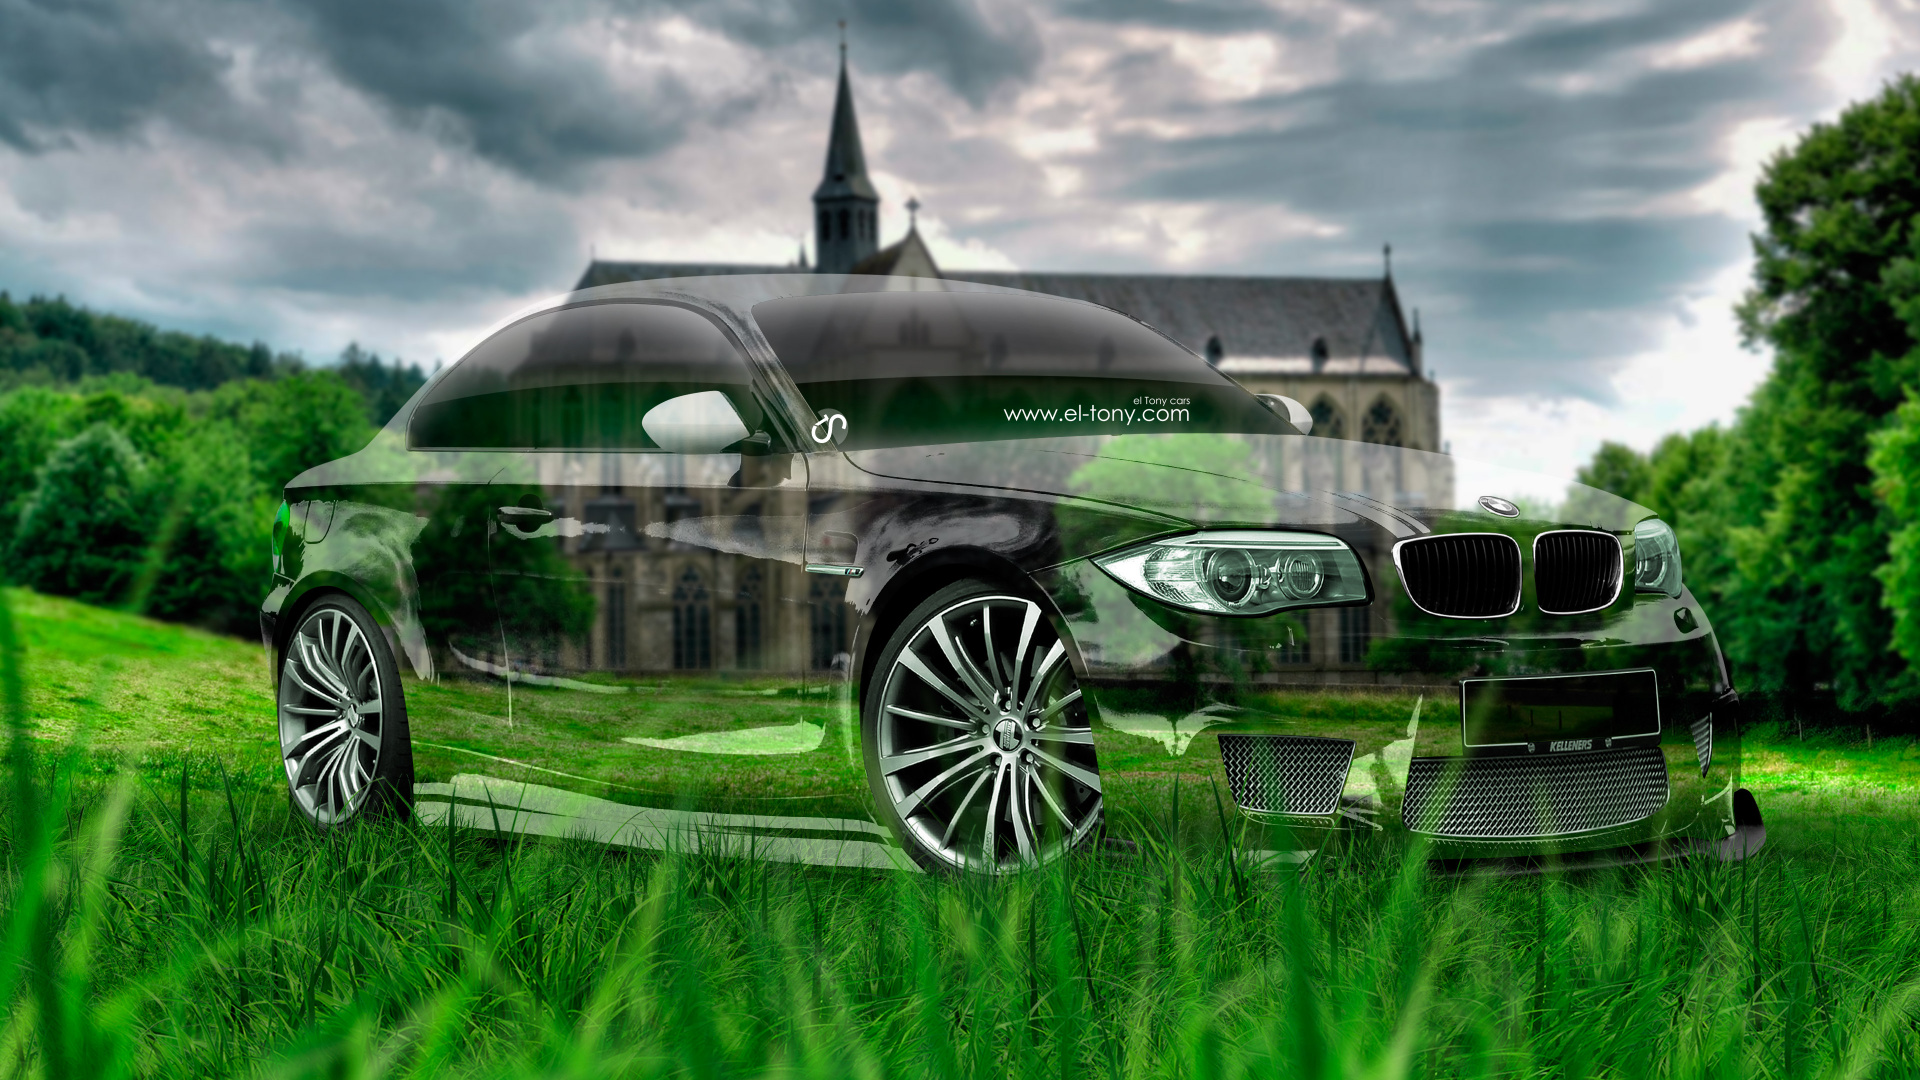 Green Mercedes Benz Coupe on Green Grass Field Near White and Gray Concrete Building During Daytime. Wallpaper in 1920x1080 Resolution